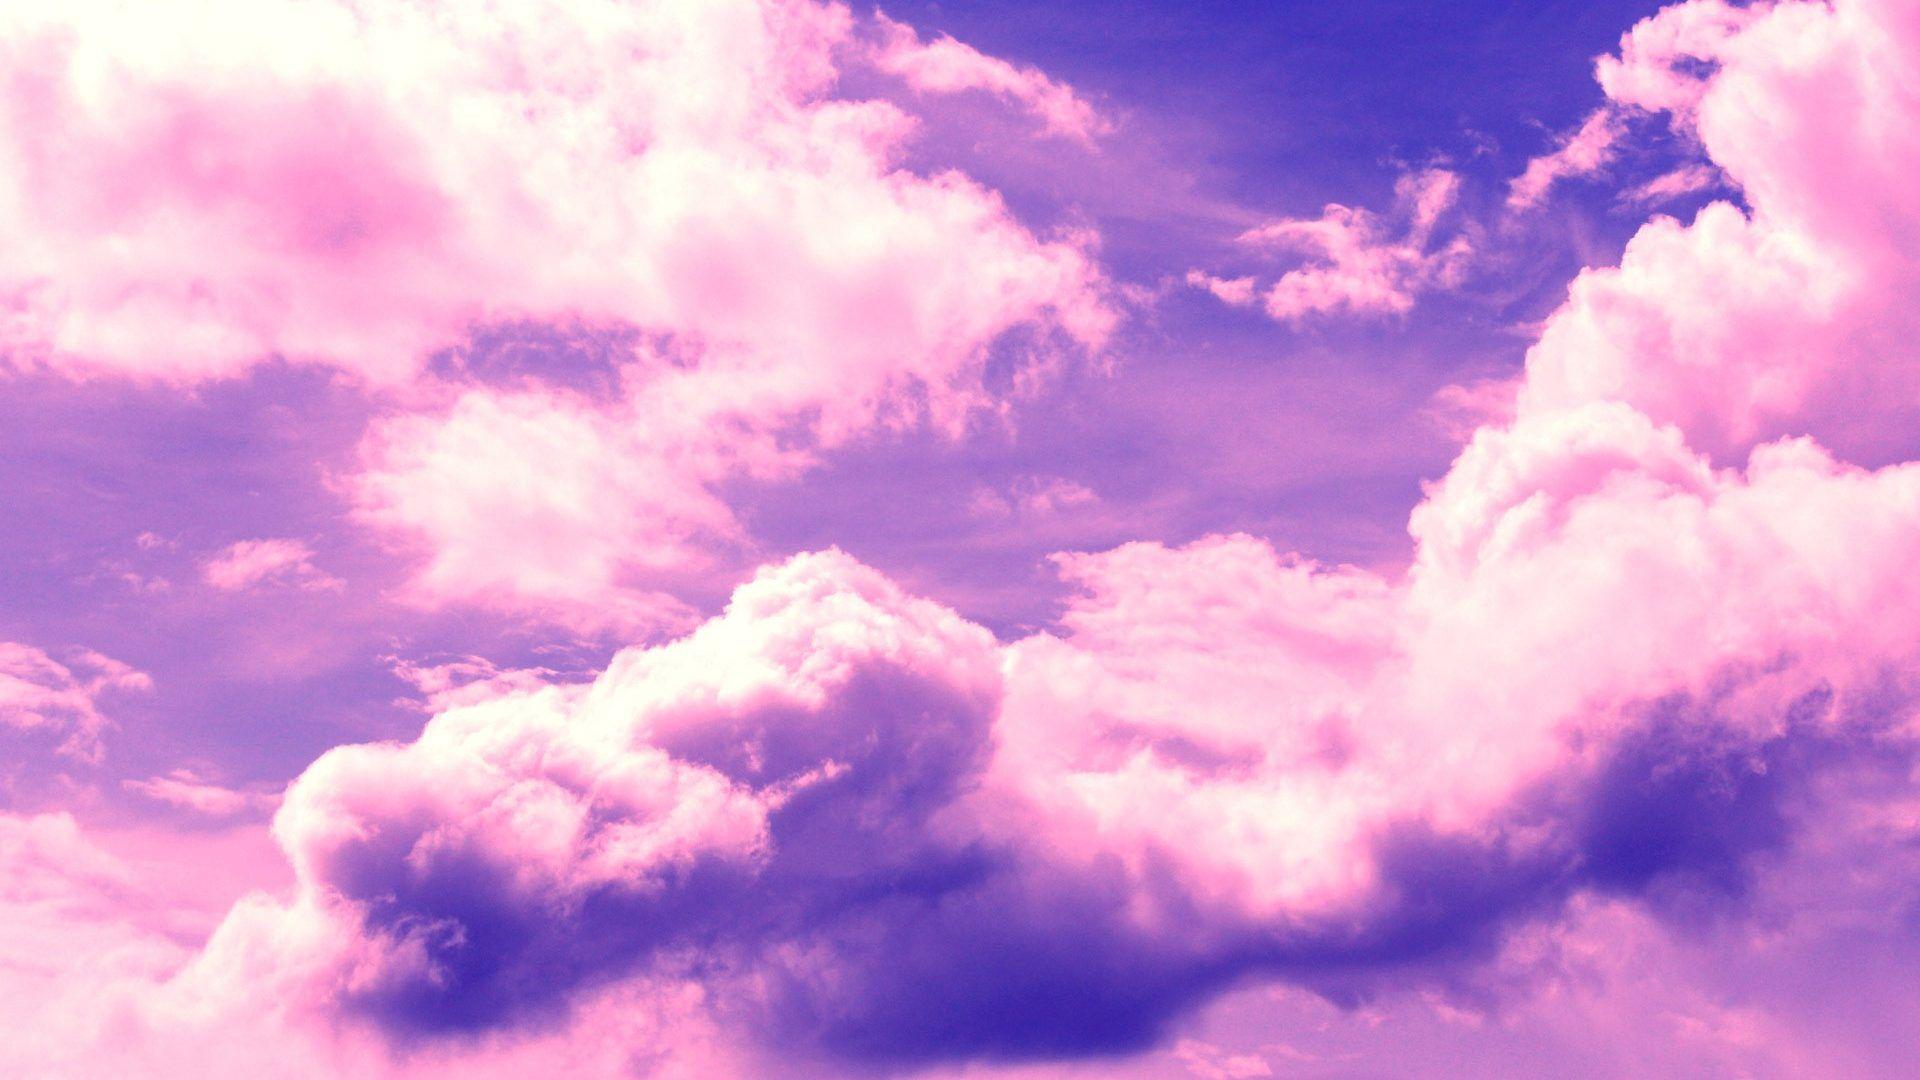 Pastel Blue And Pink Cloud Backgrounds 1920x1080